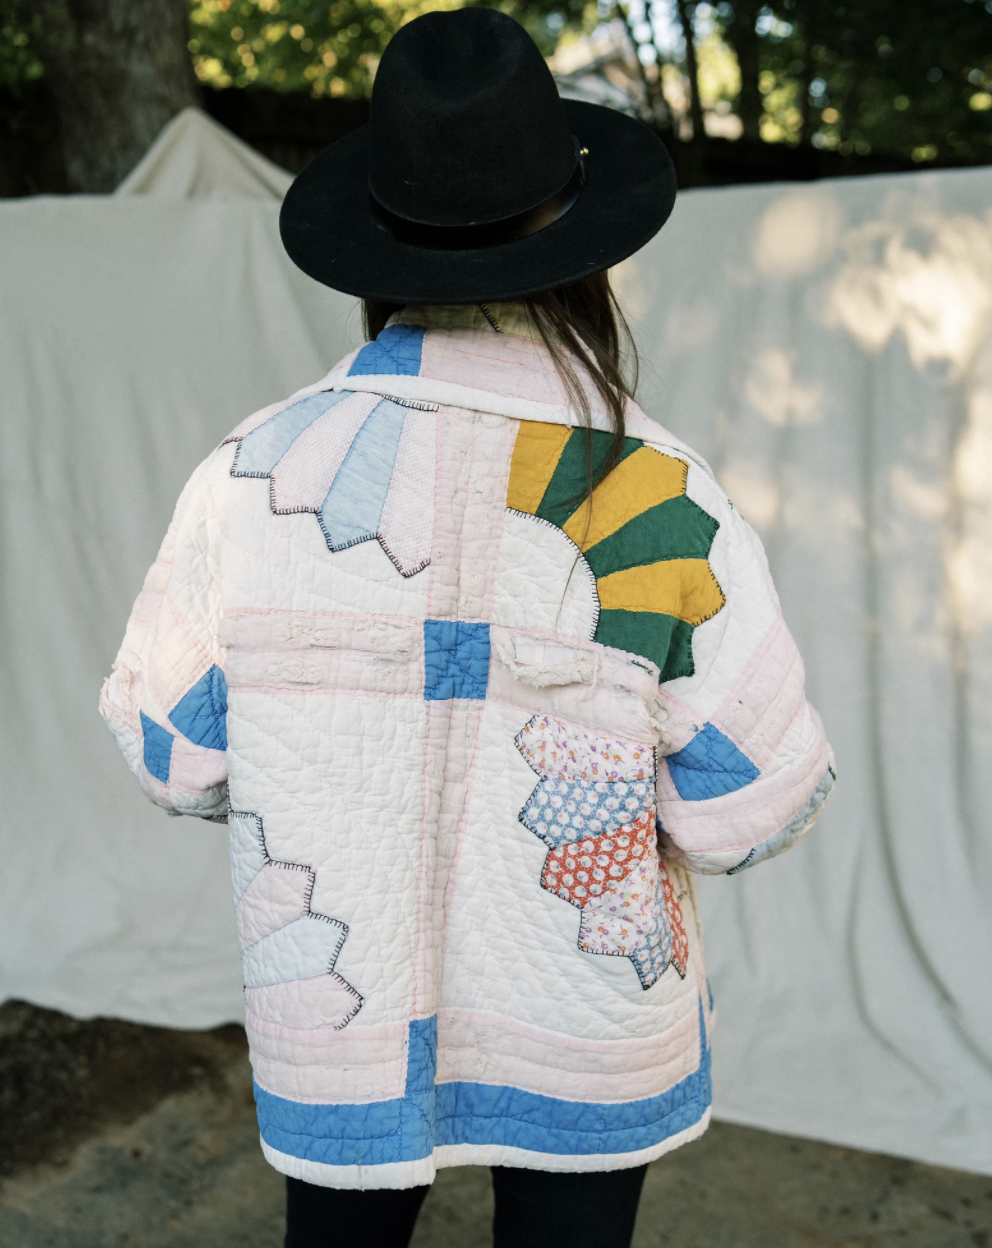  Caitlyn Ferson of Caitlyn Paige Creative shares about her vintage upcycled quilt jackets on the bustle blog. 